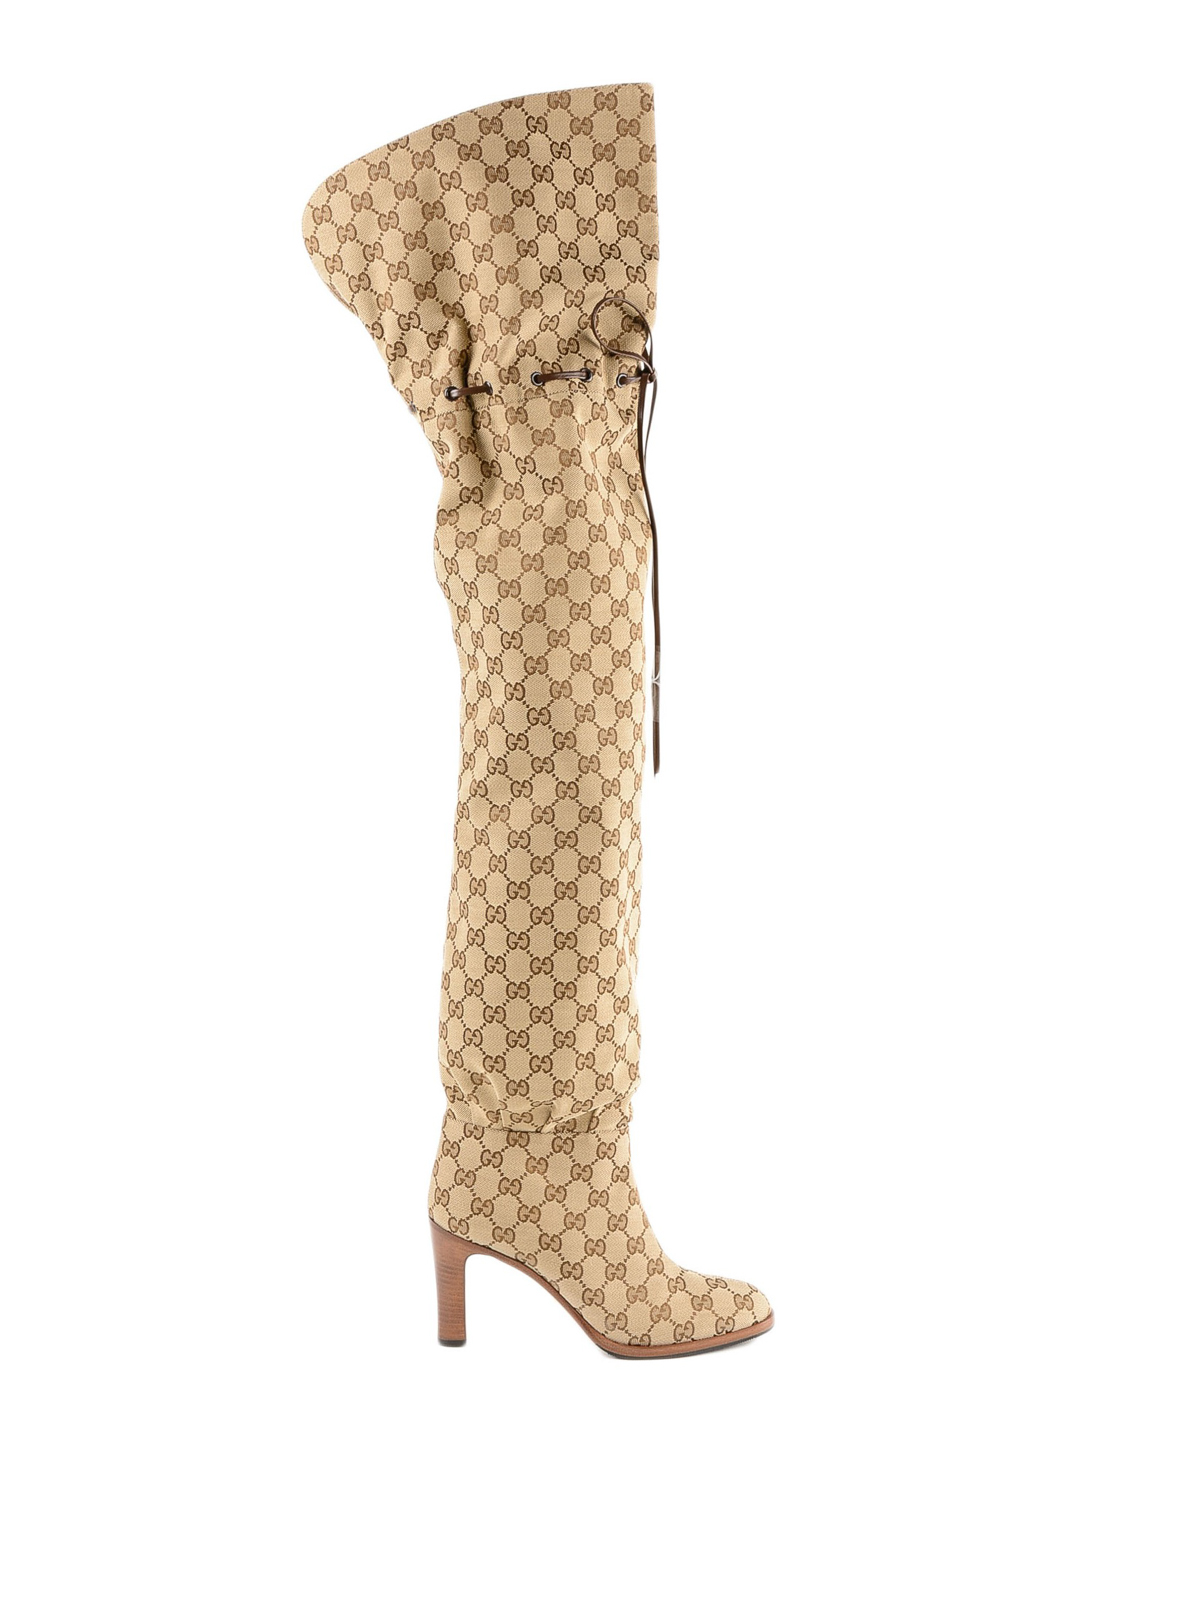 Gucci - Original GG over-the-knee boots - boots - 523513KY9V09770